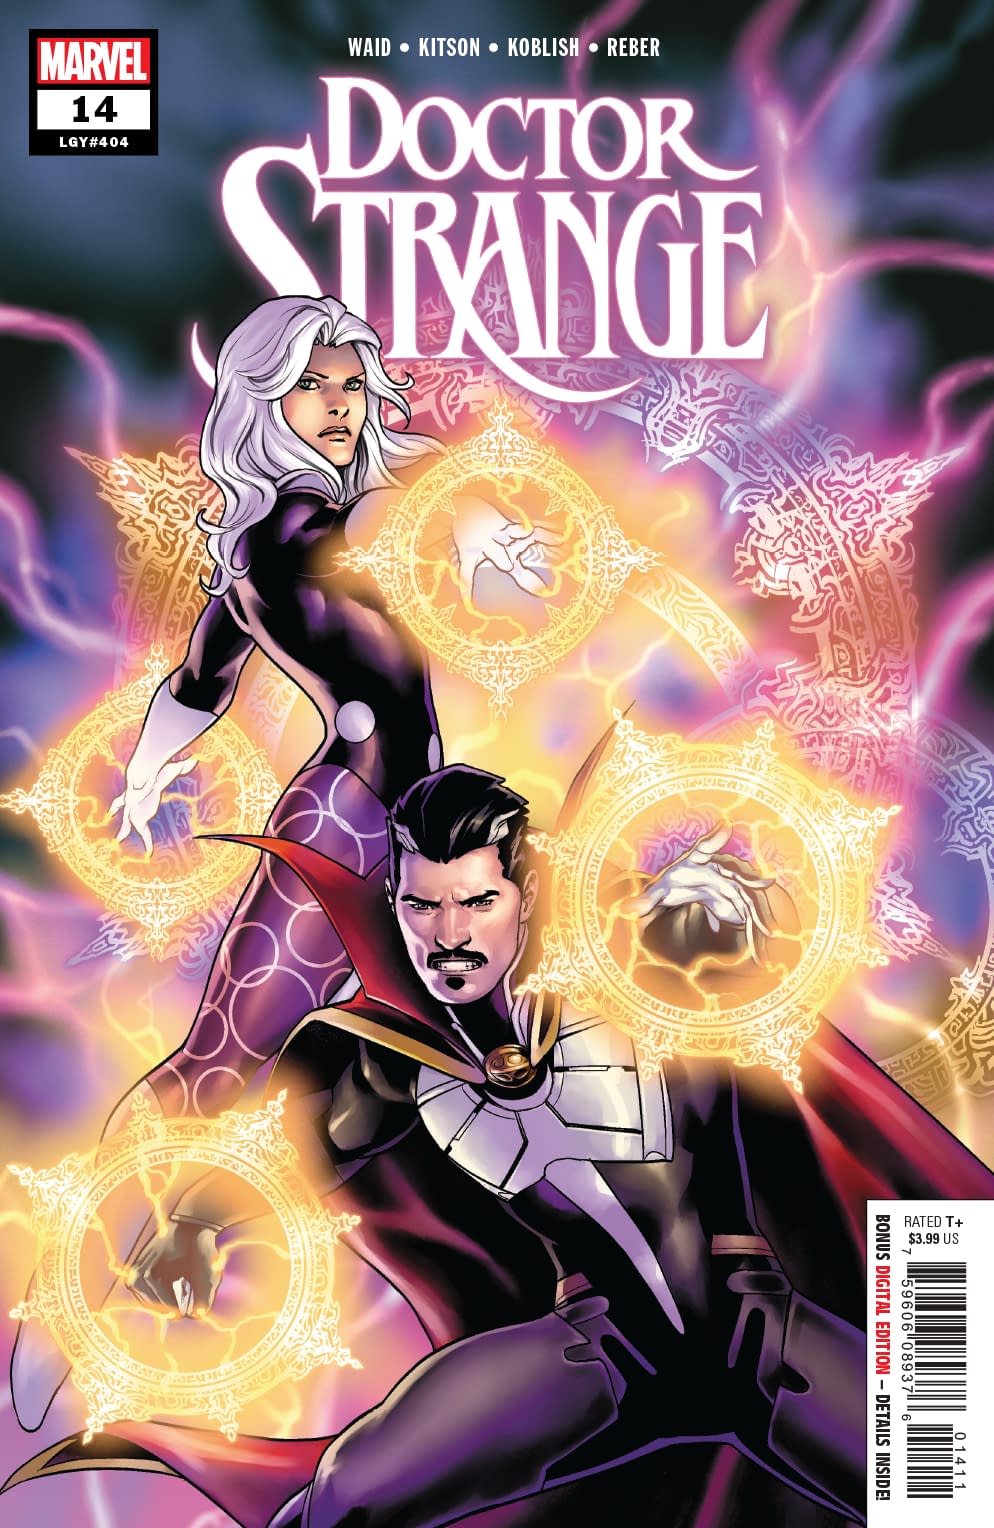 Nightmare is a Climate Change Denier in Doctor Strange #14 (Preview)